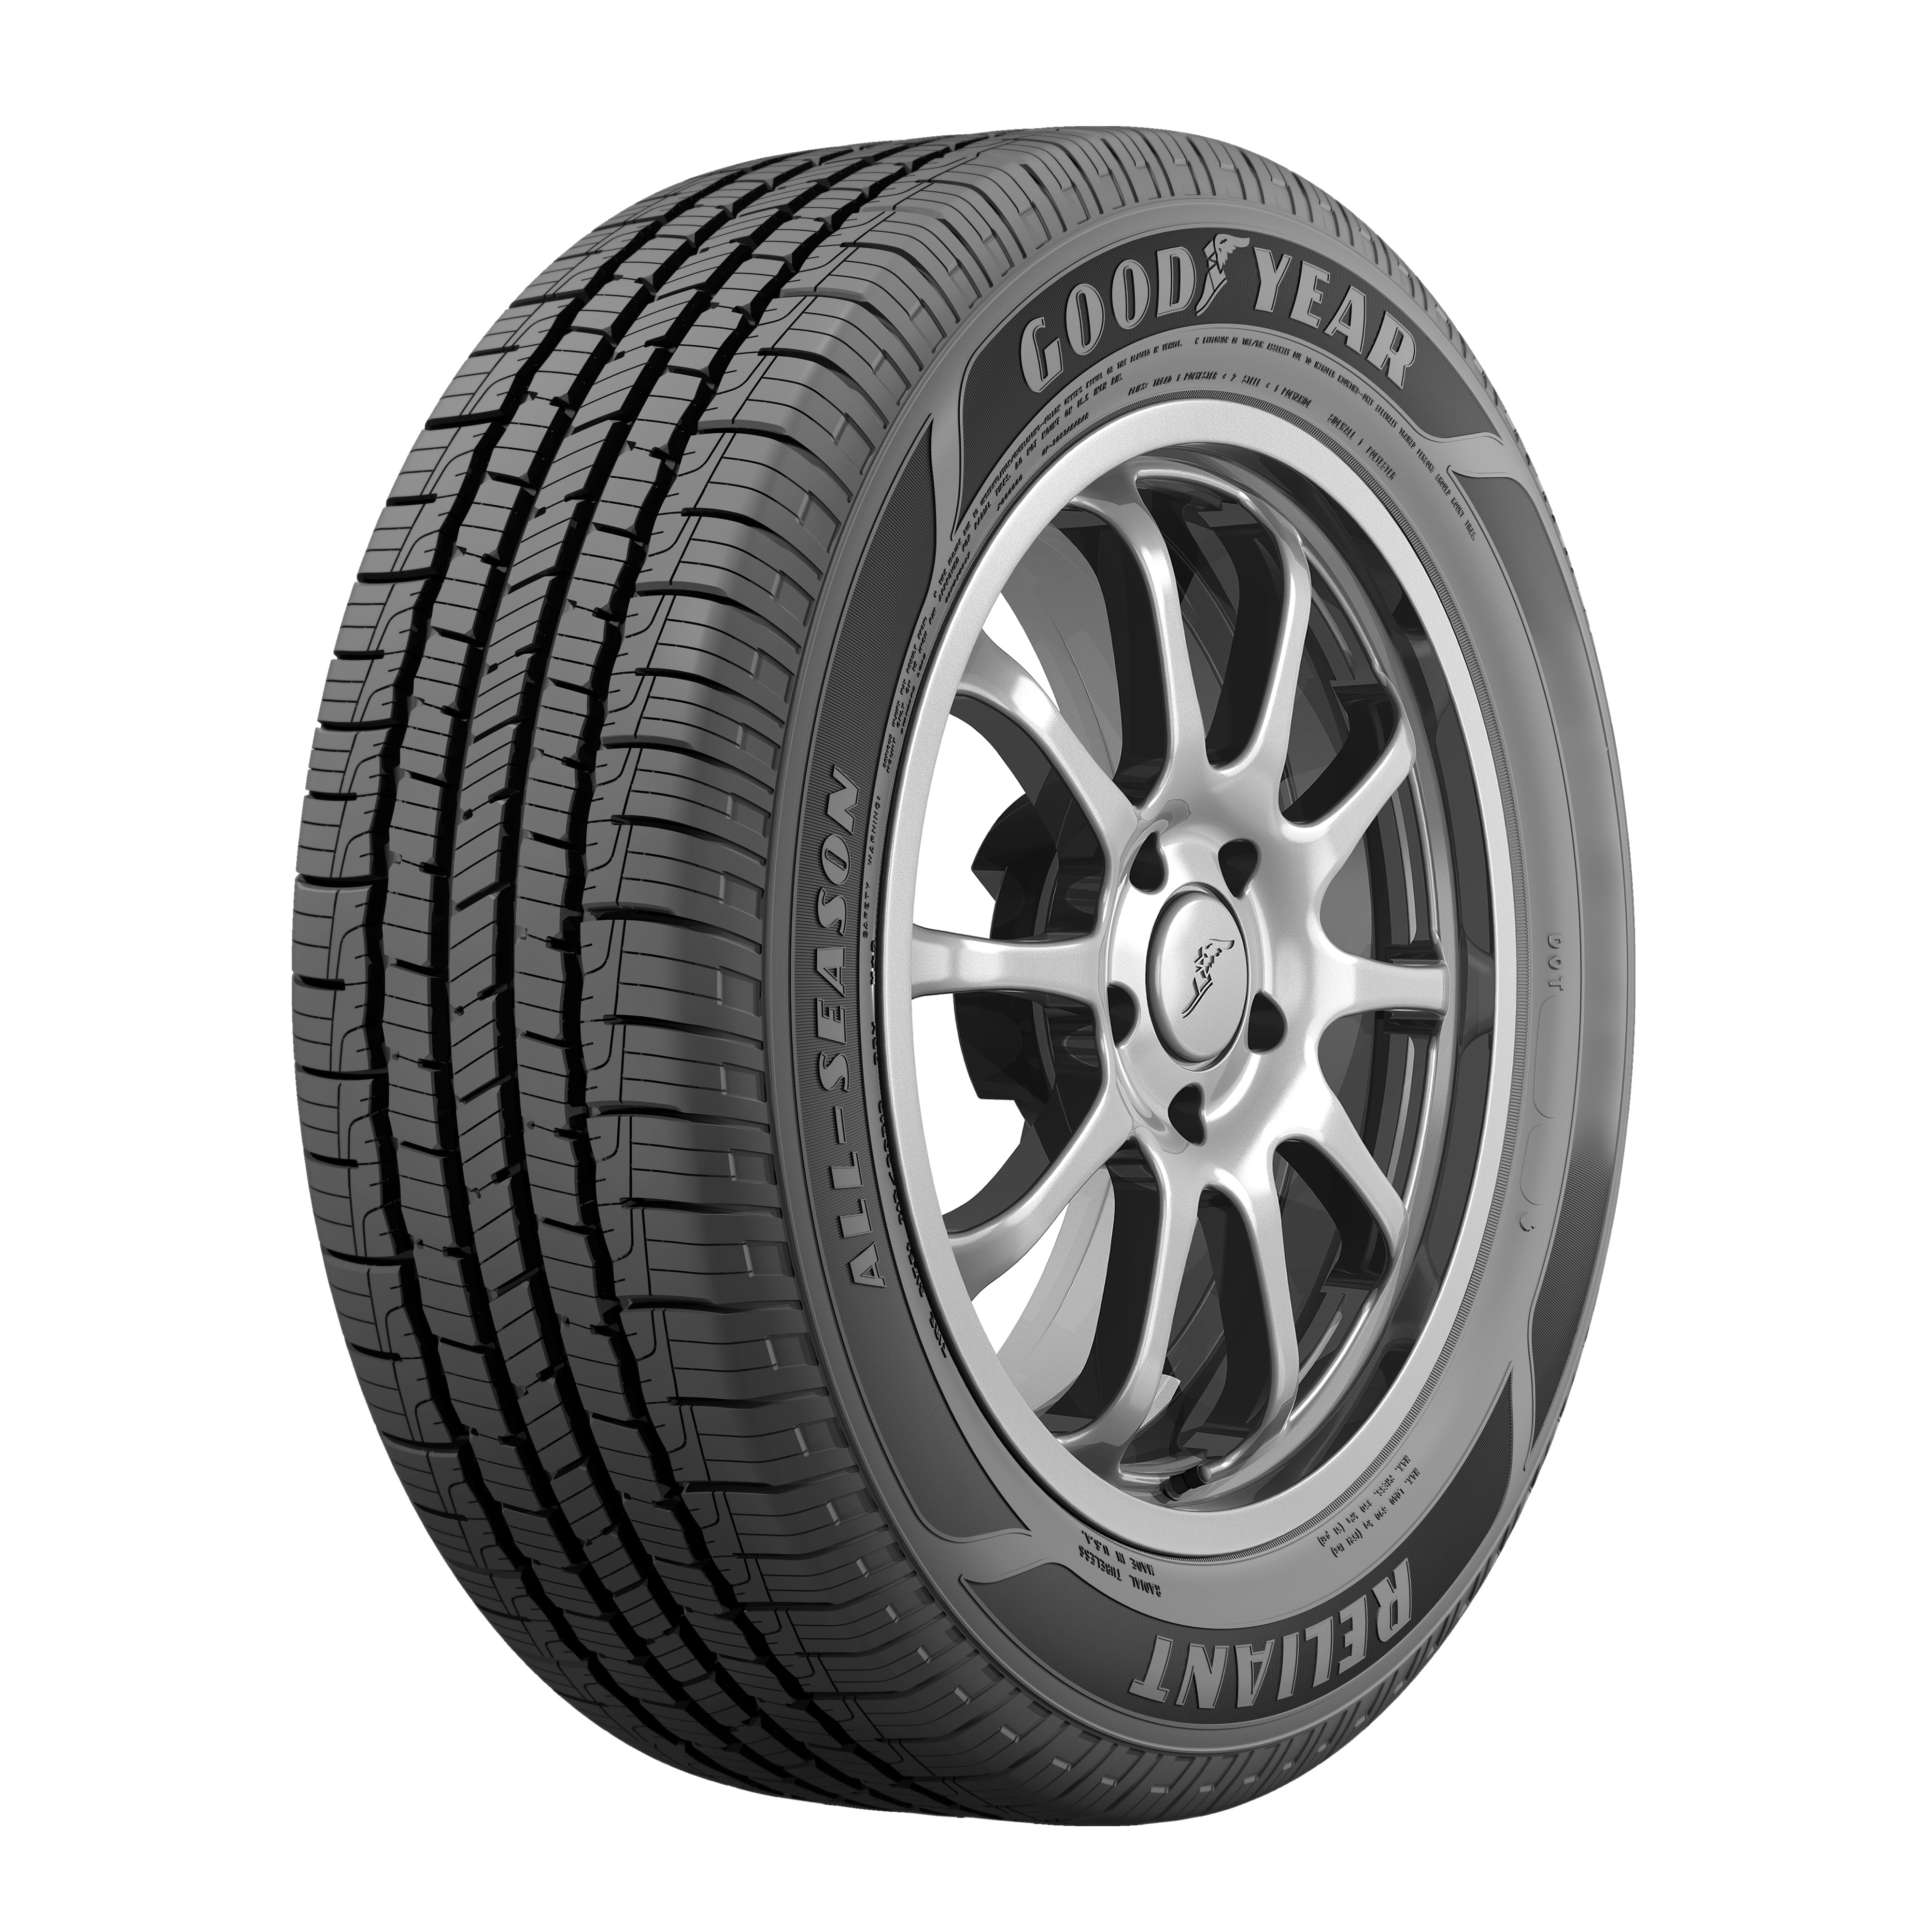 CONTINENTAL CROSS WINTER CONTACT M&S 99 H 225/60 R 17 